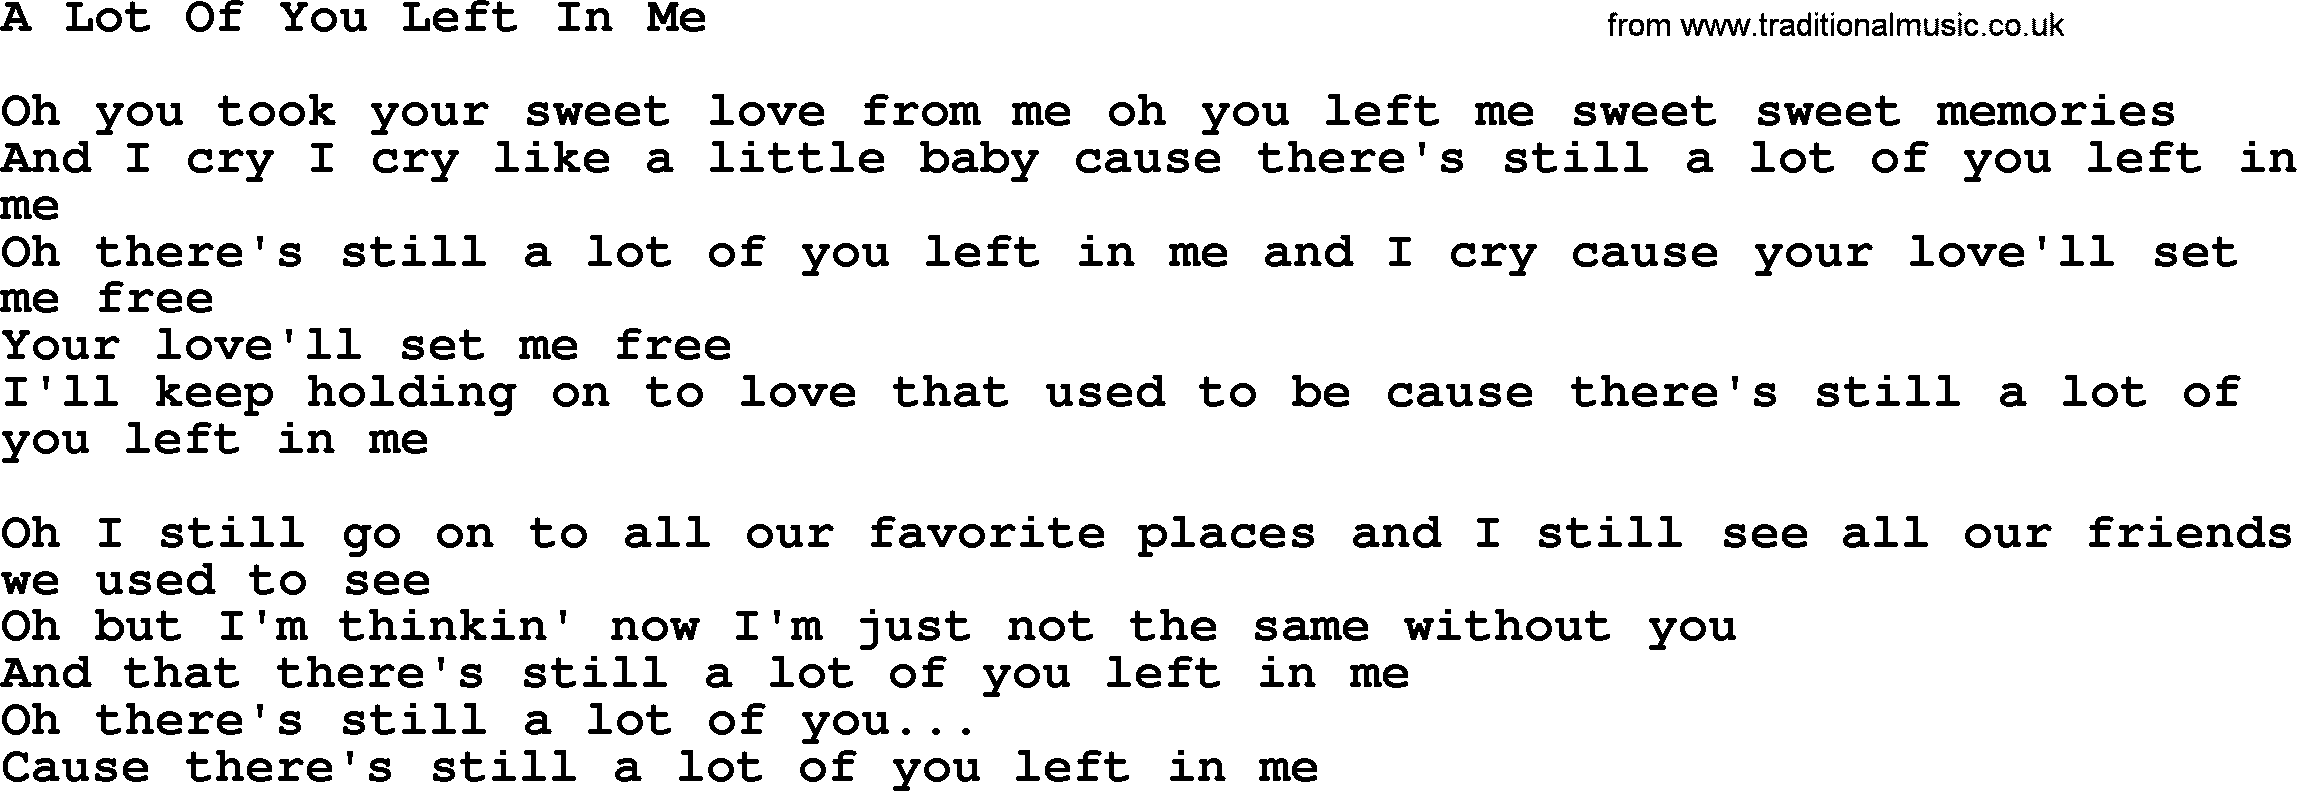 Dolly Parton song A Lot Of You Left In Me.txt lyrics